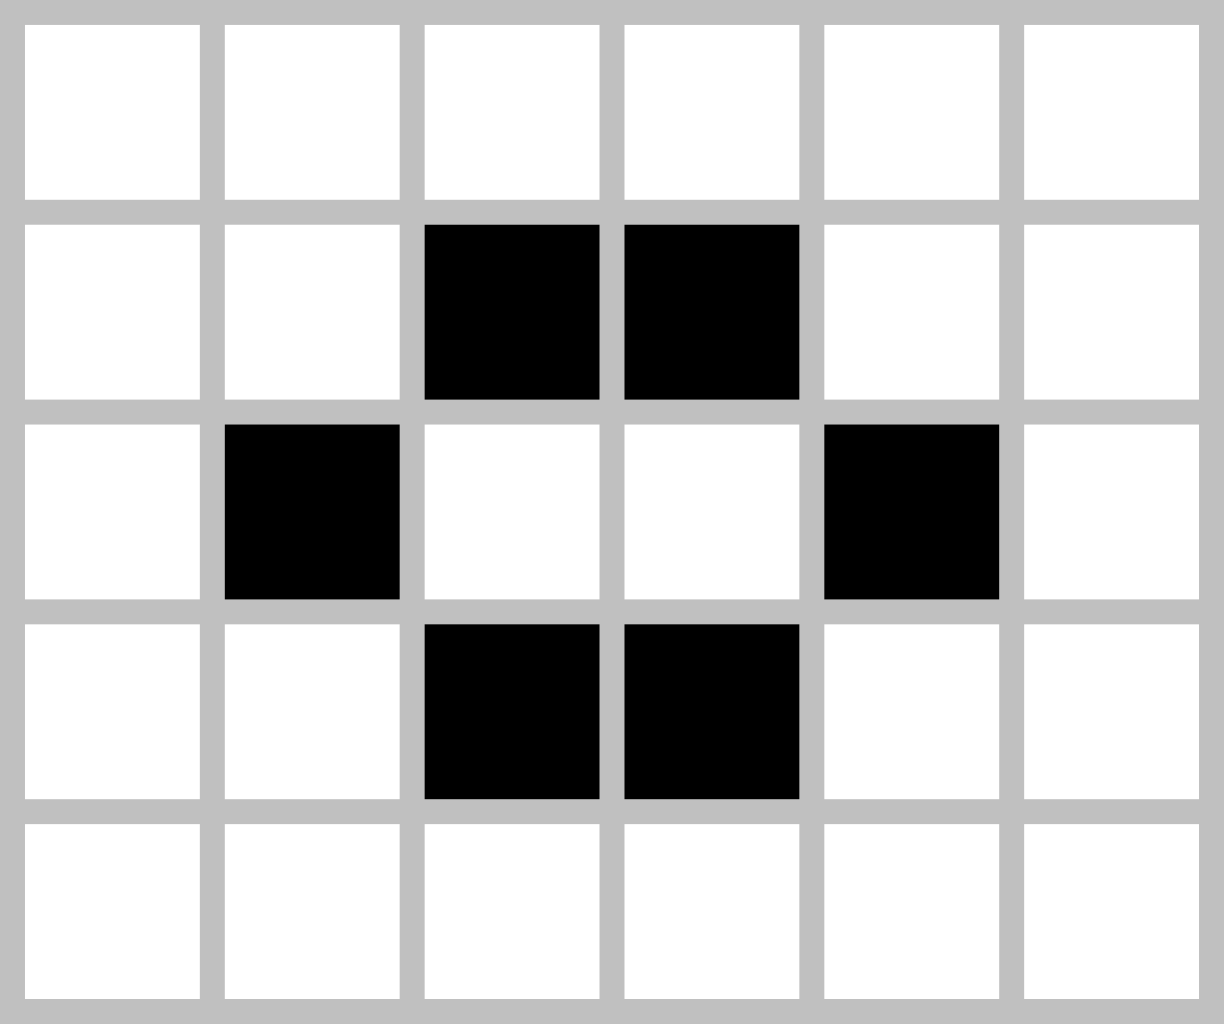 A representation of a beehive using a 5x6 grid of squares.